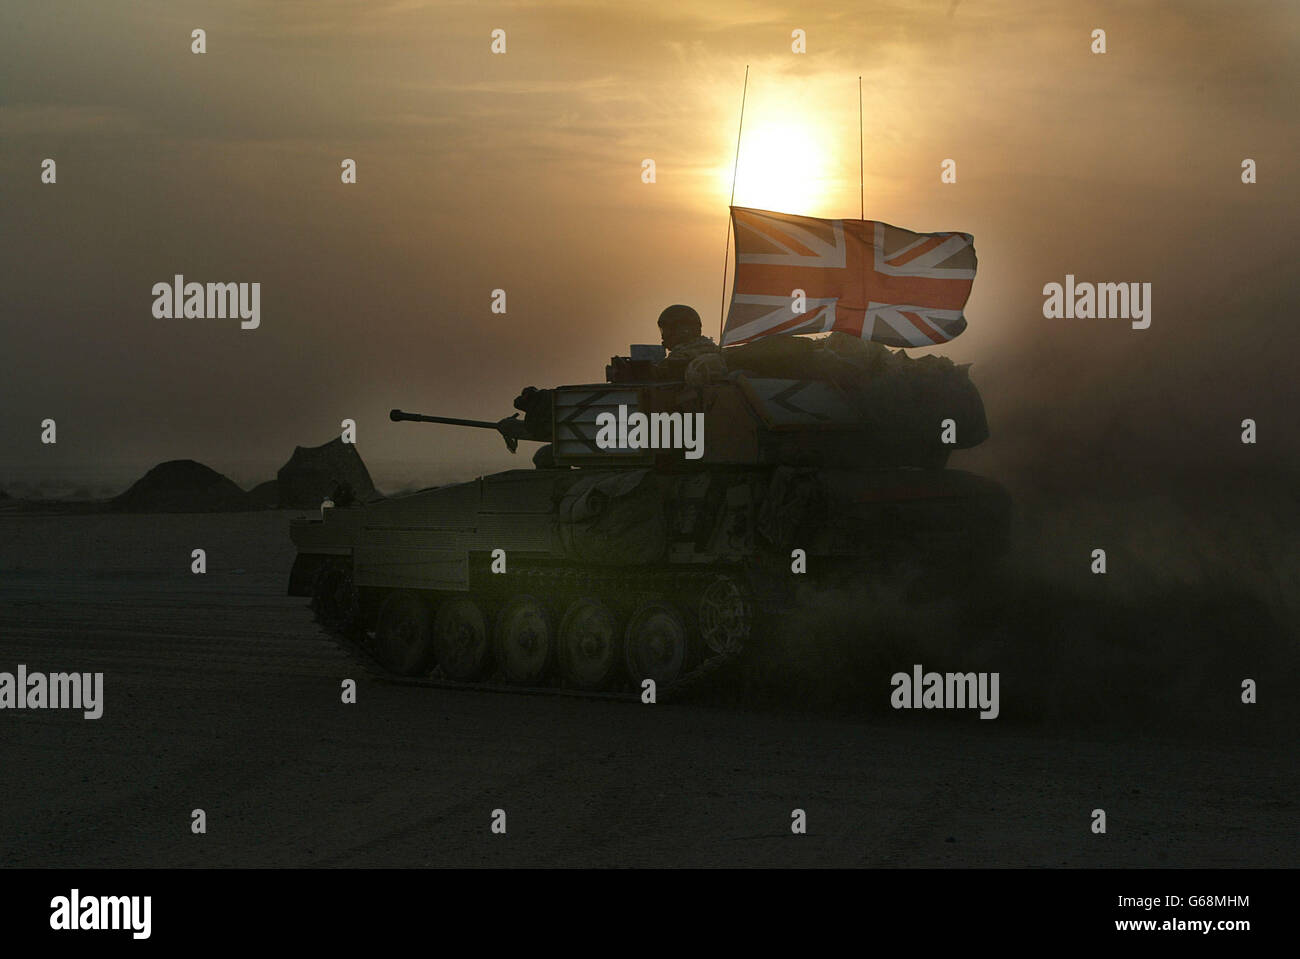 Image released British Forces in Kuwait, of the 'Scimitar' light armoured vehicles from the Queen's Dragoon Guards taking up final positions in the northern Kuwaiti desert. Stock Photo